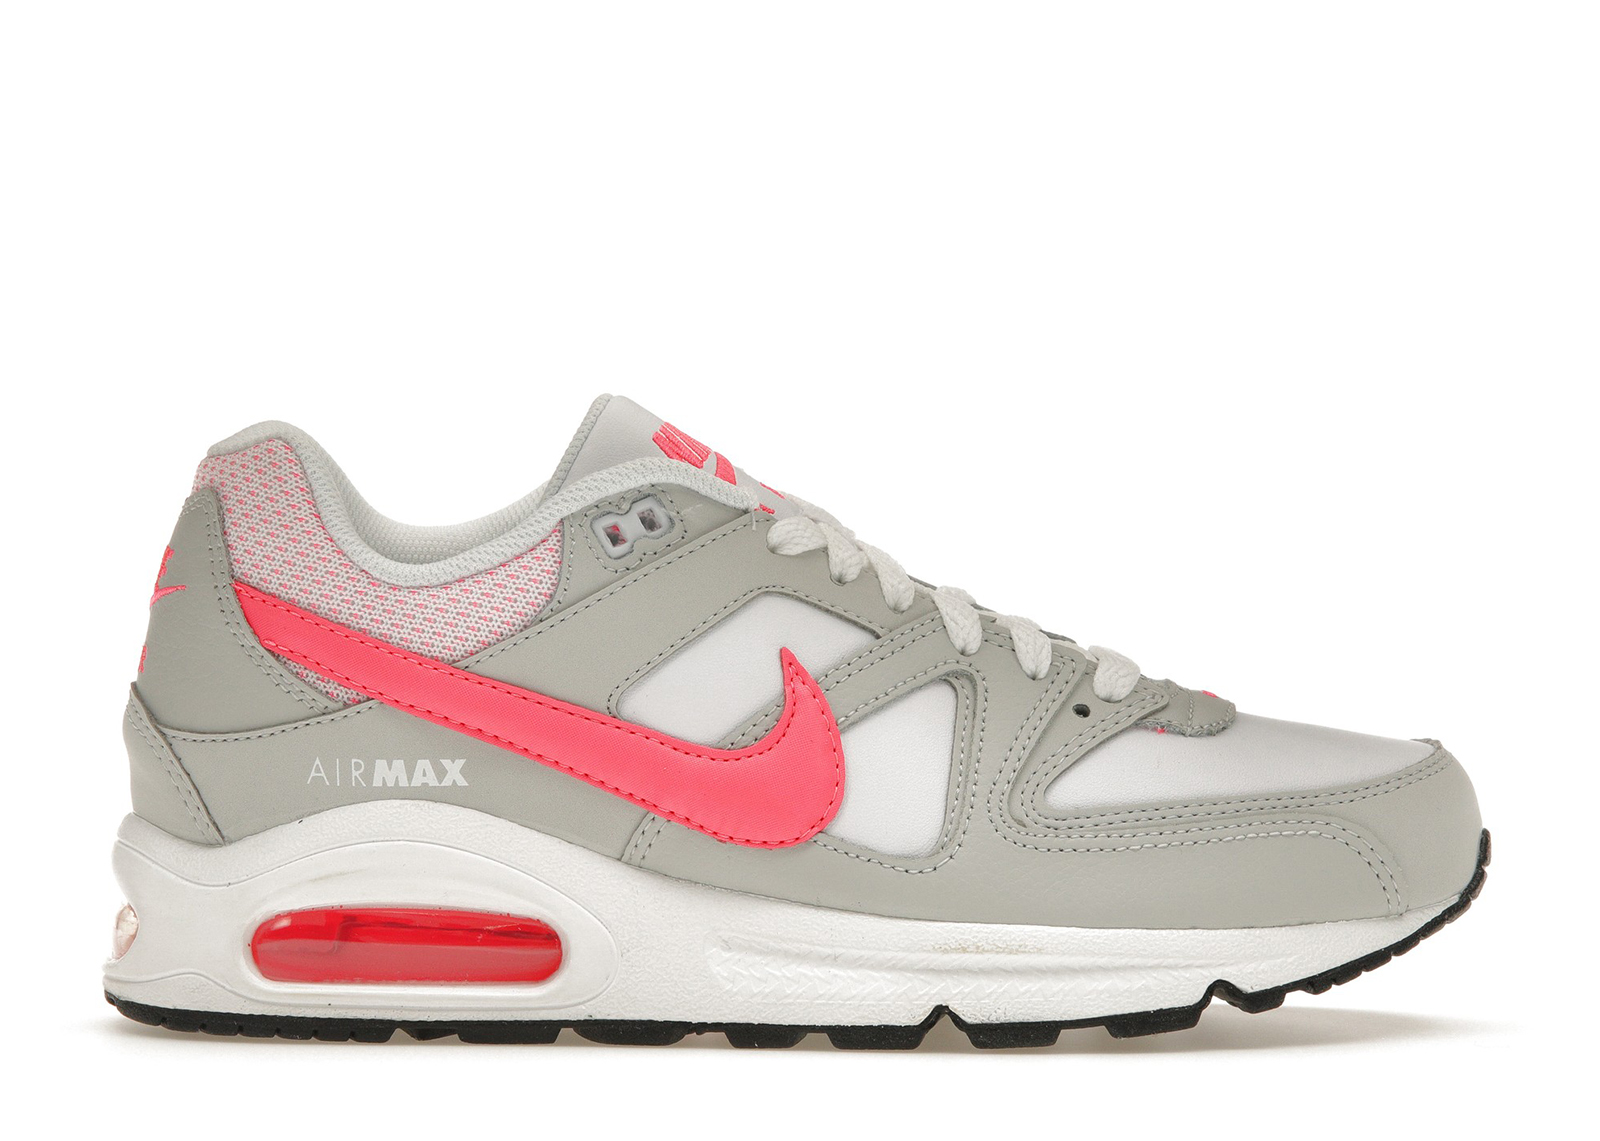 Nike Air Max Command Hyper Punch (Women's) - 397690-169 - US